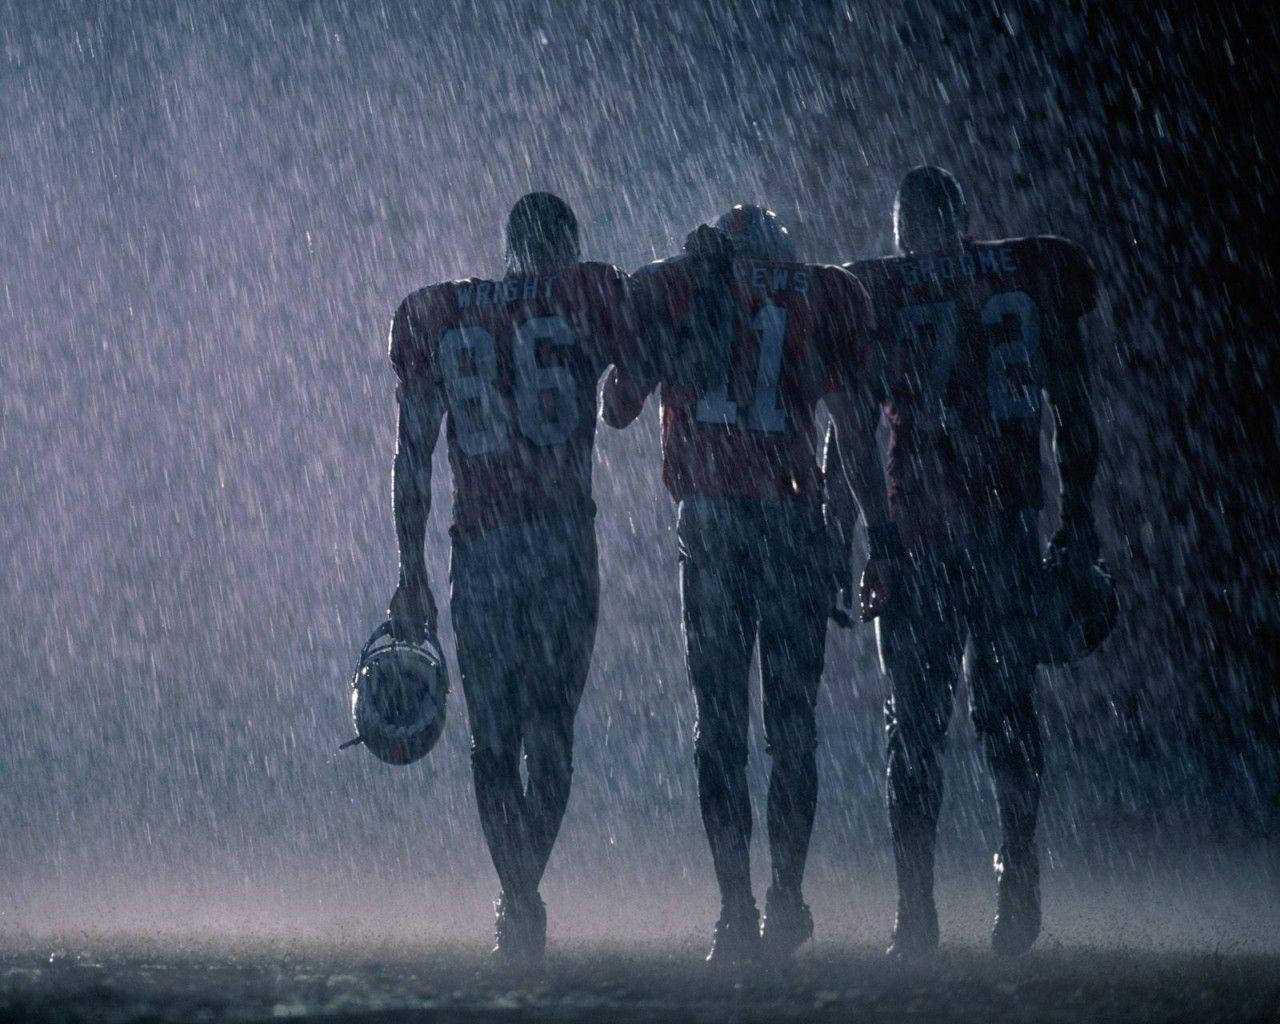 Nfl Football Players In The Rain Wallpaper